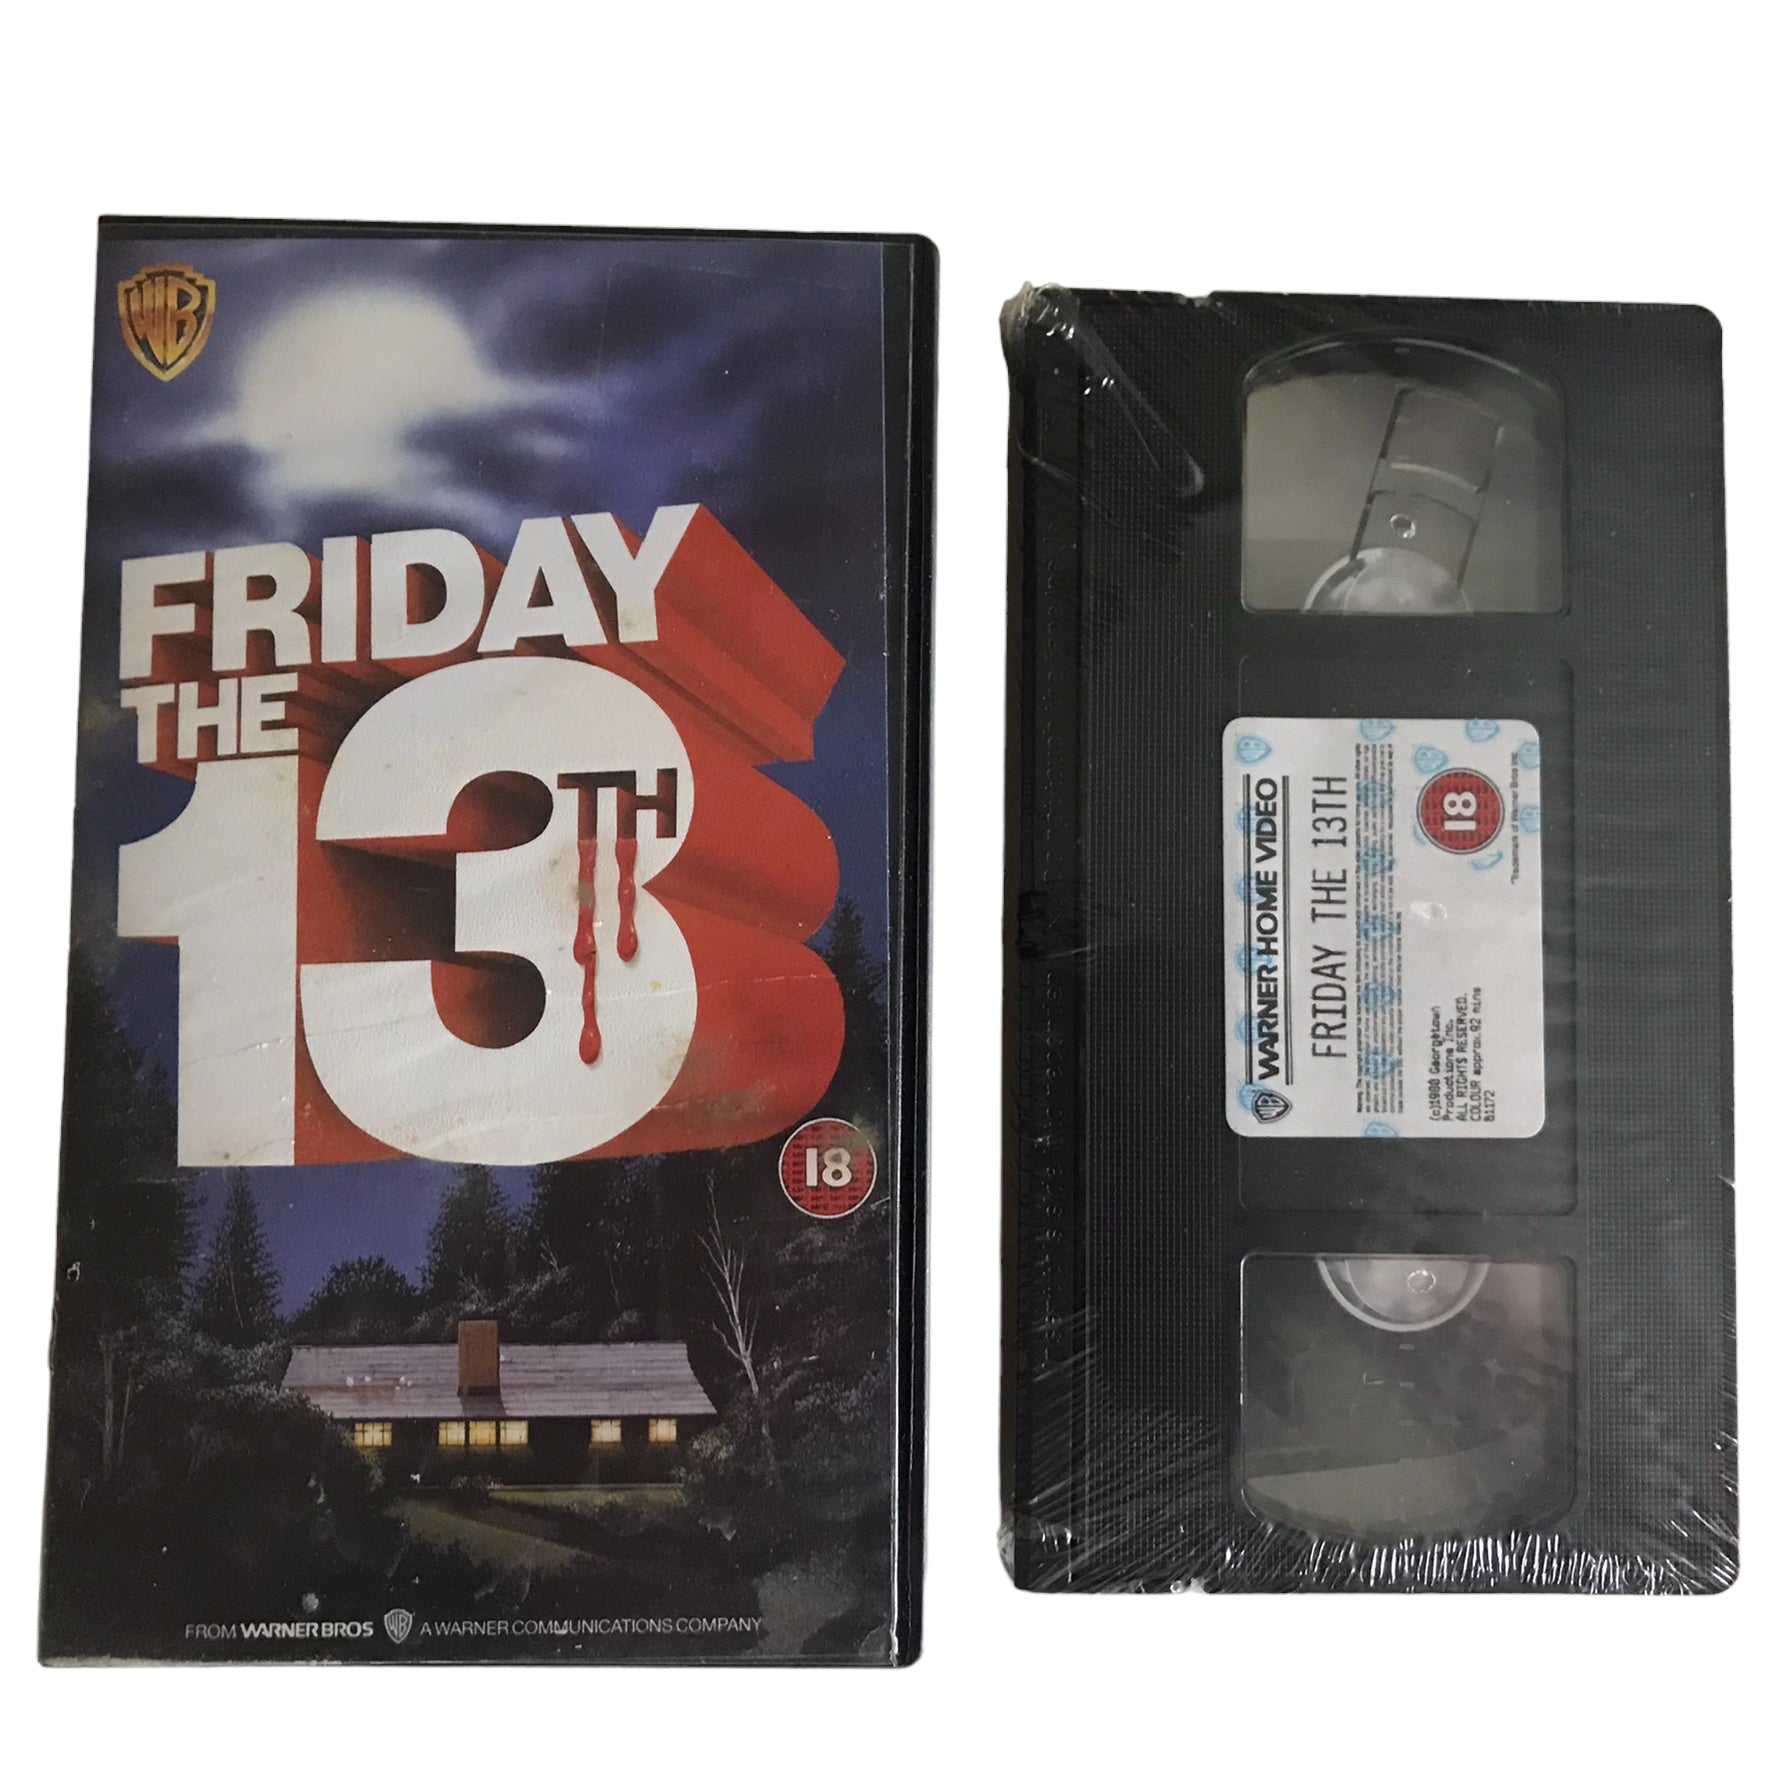 Friday The 13th - Brand New Sealed - Betsy Palmer - PARKFIELD - Horror - Pal - VHS-